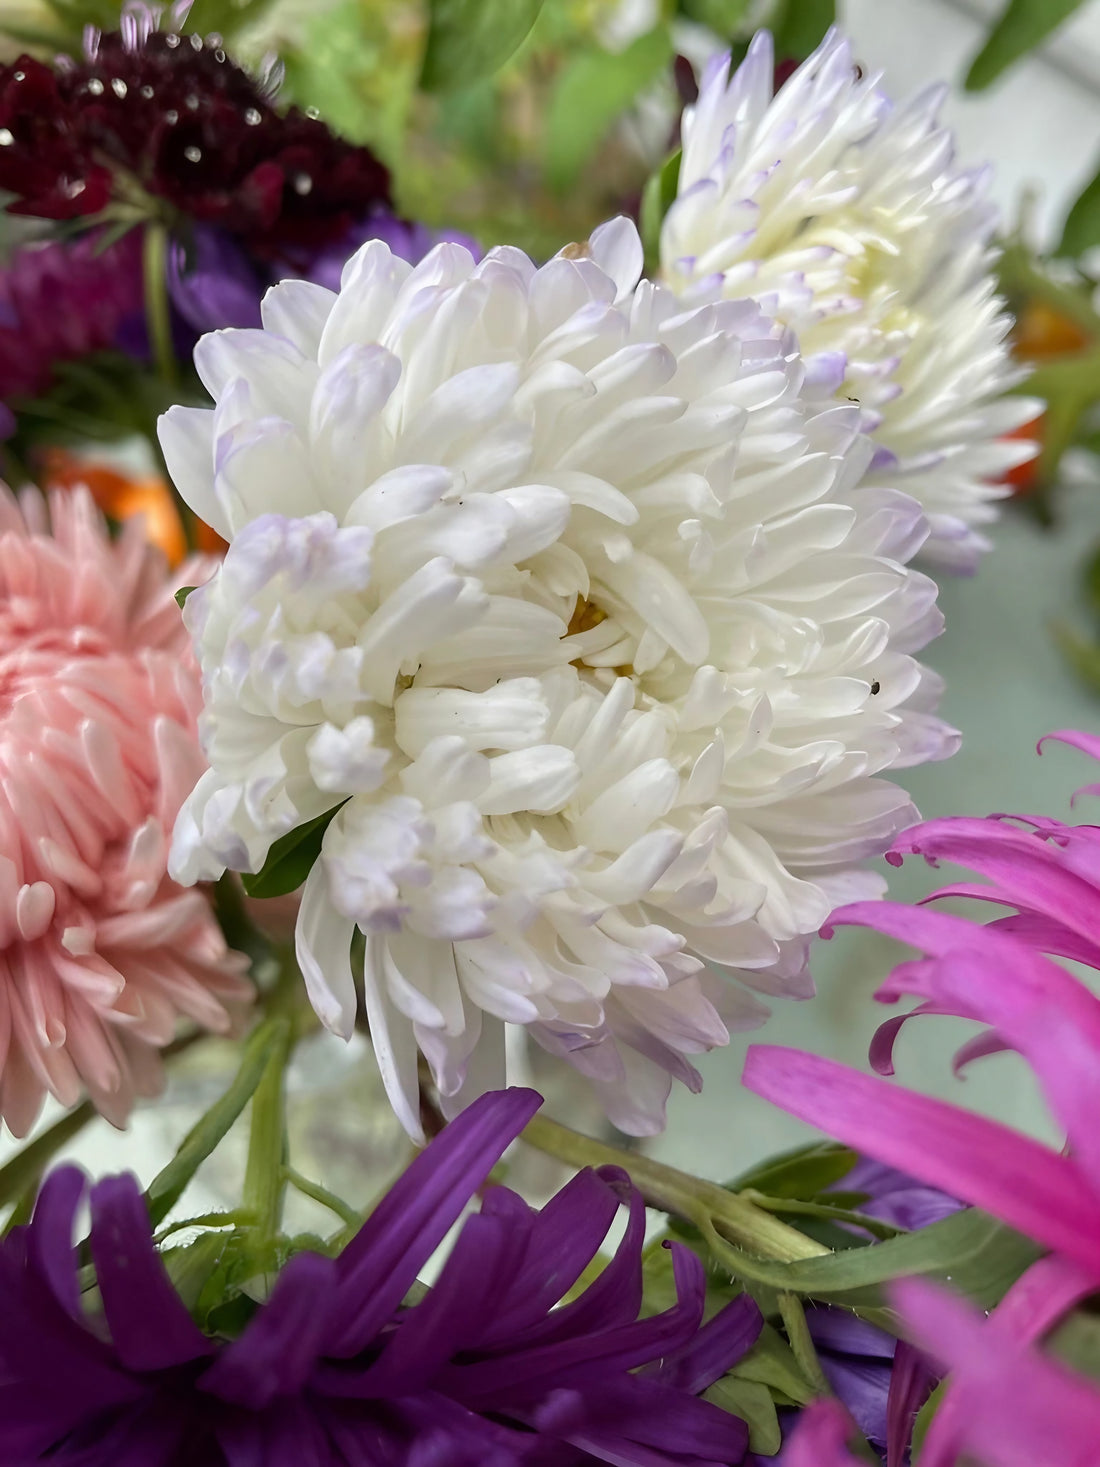 Arrangement of Aster China Peony Mix flowers in shades of white and purple in a vase